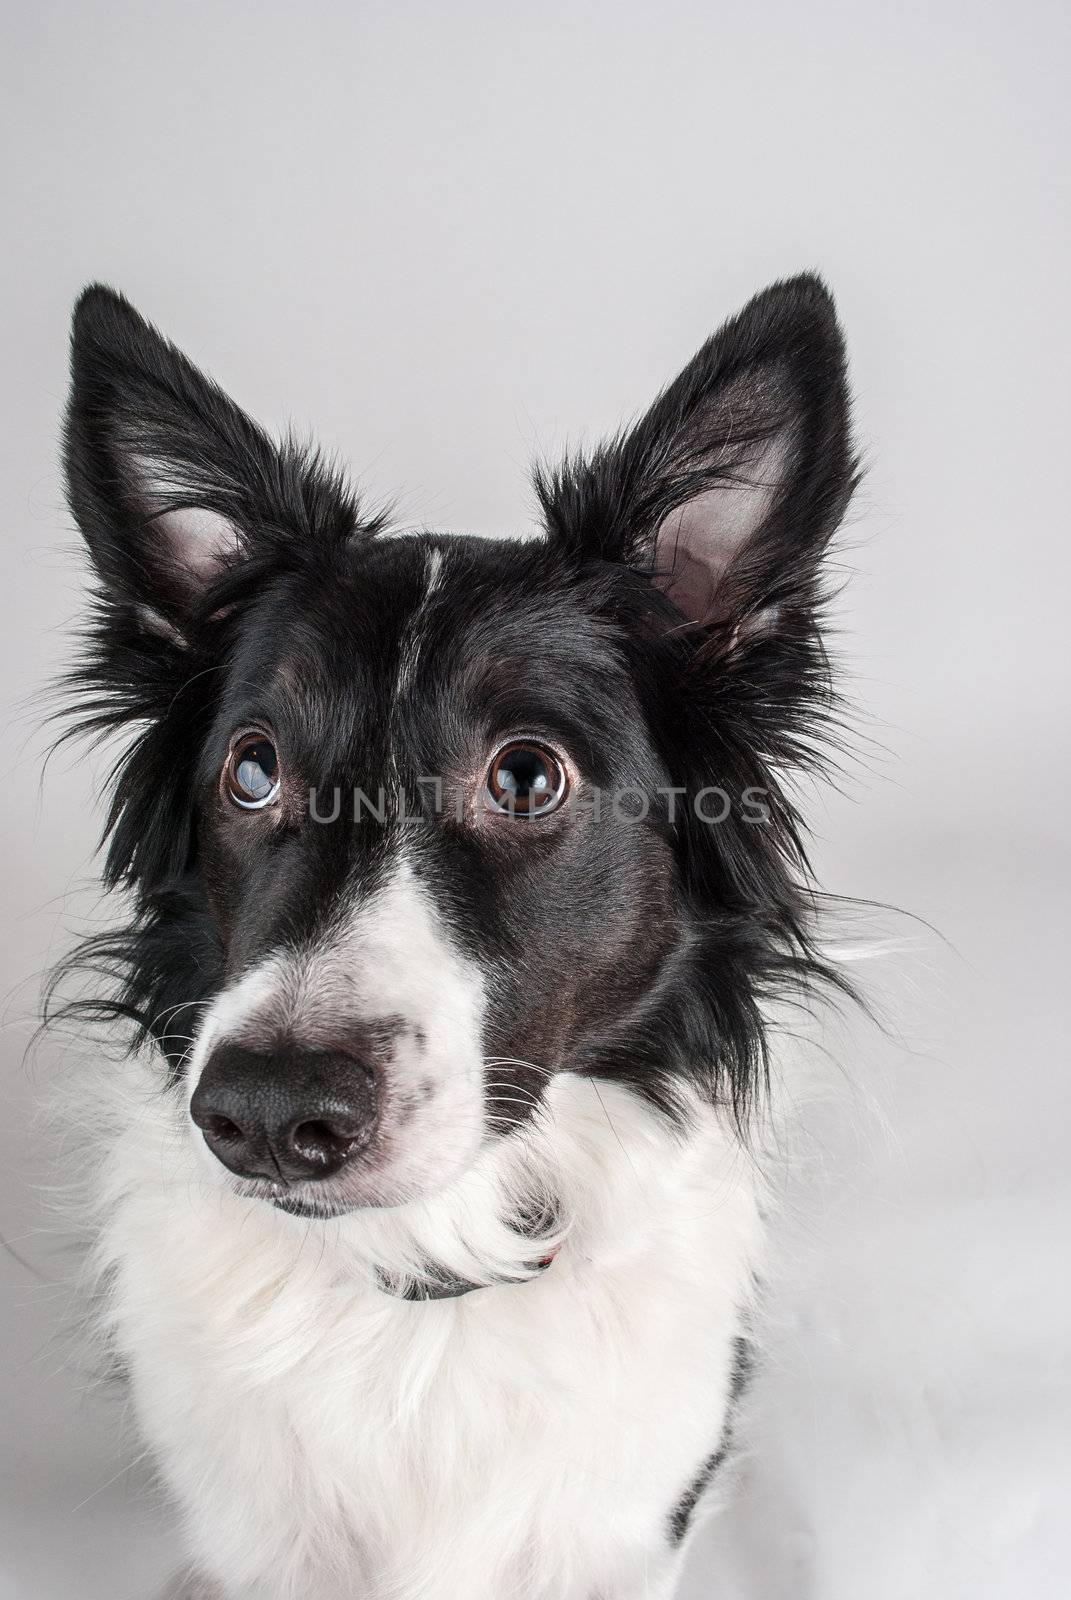 Photogrpah of an attentive Border Collie on white background begging for attention.